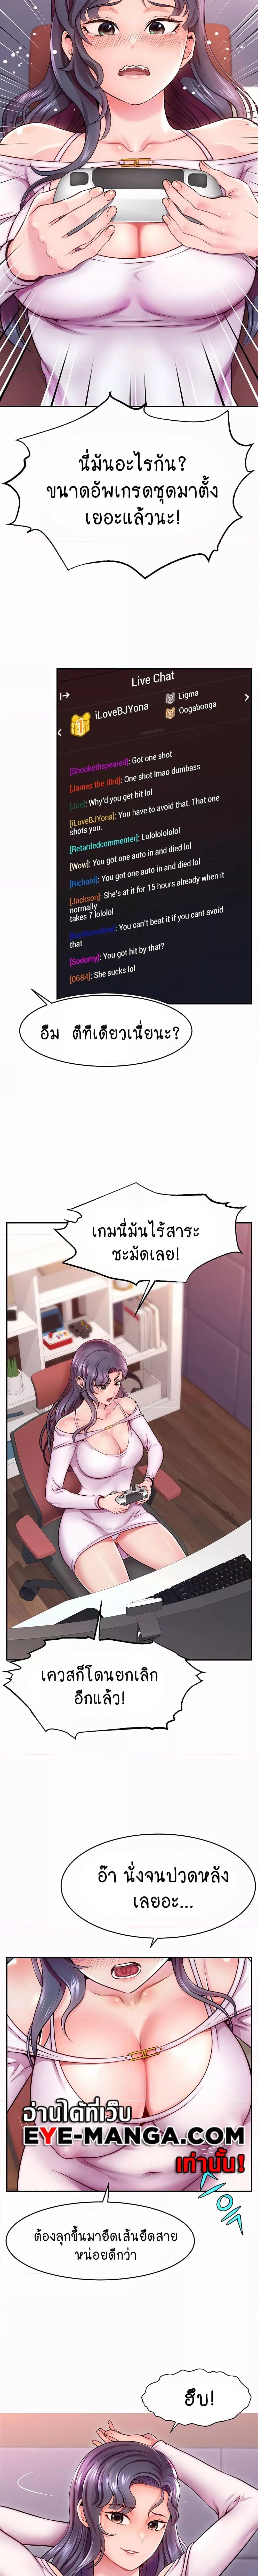 Making Friends With Streamers by Hacking! ตอนที่ 1 ภาพ 1